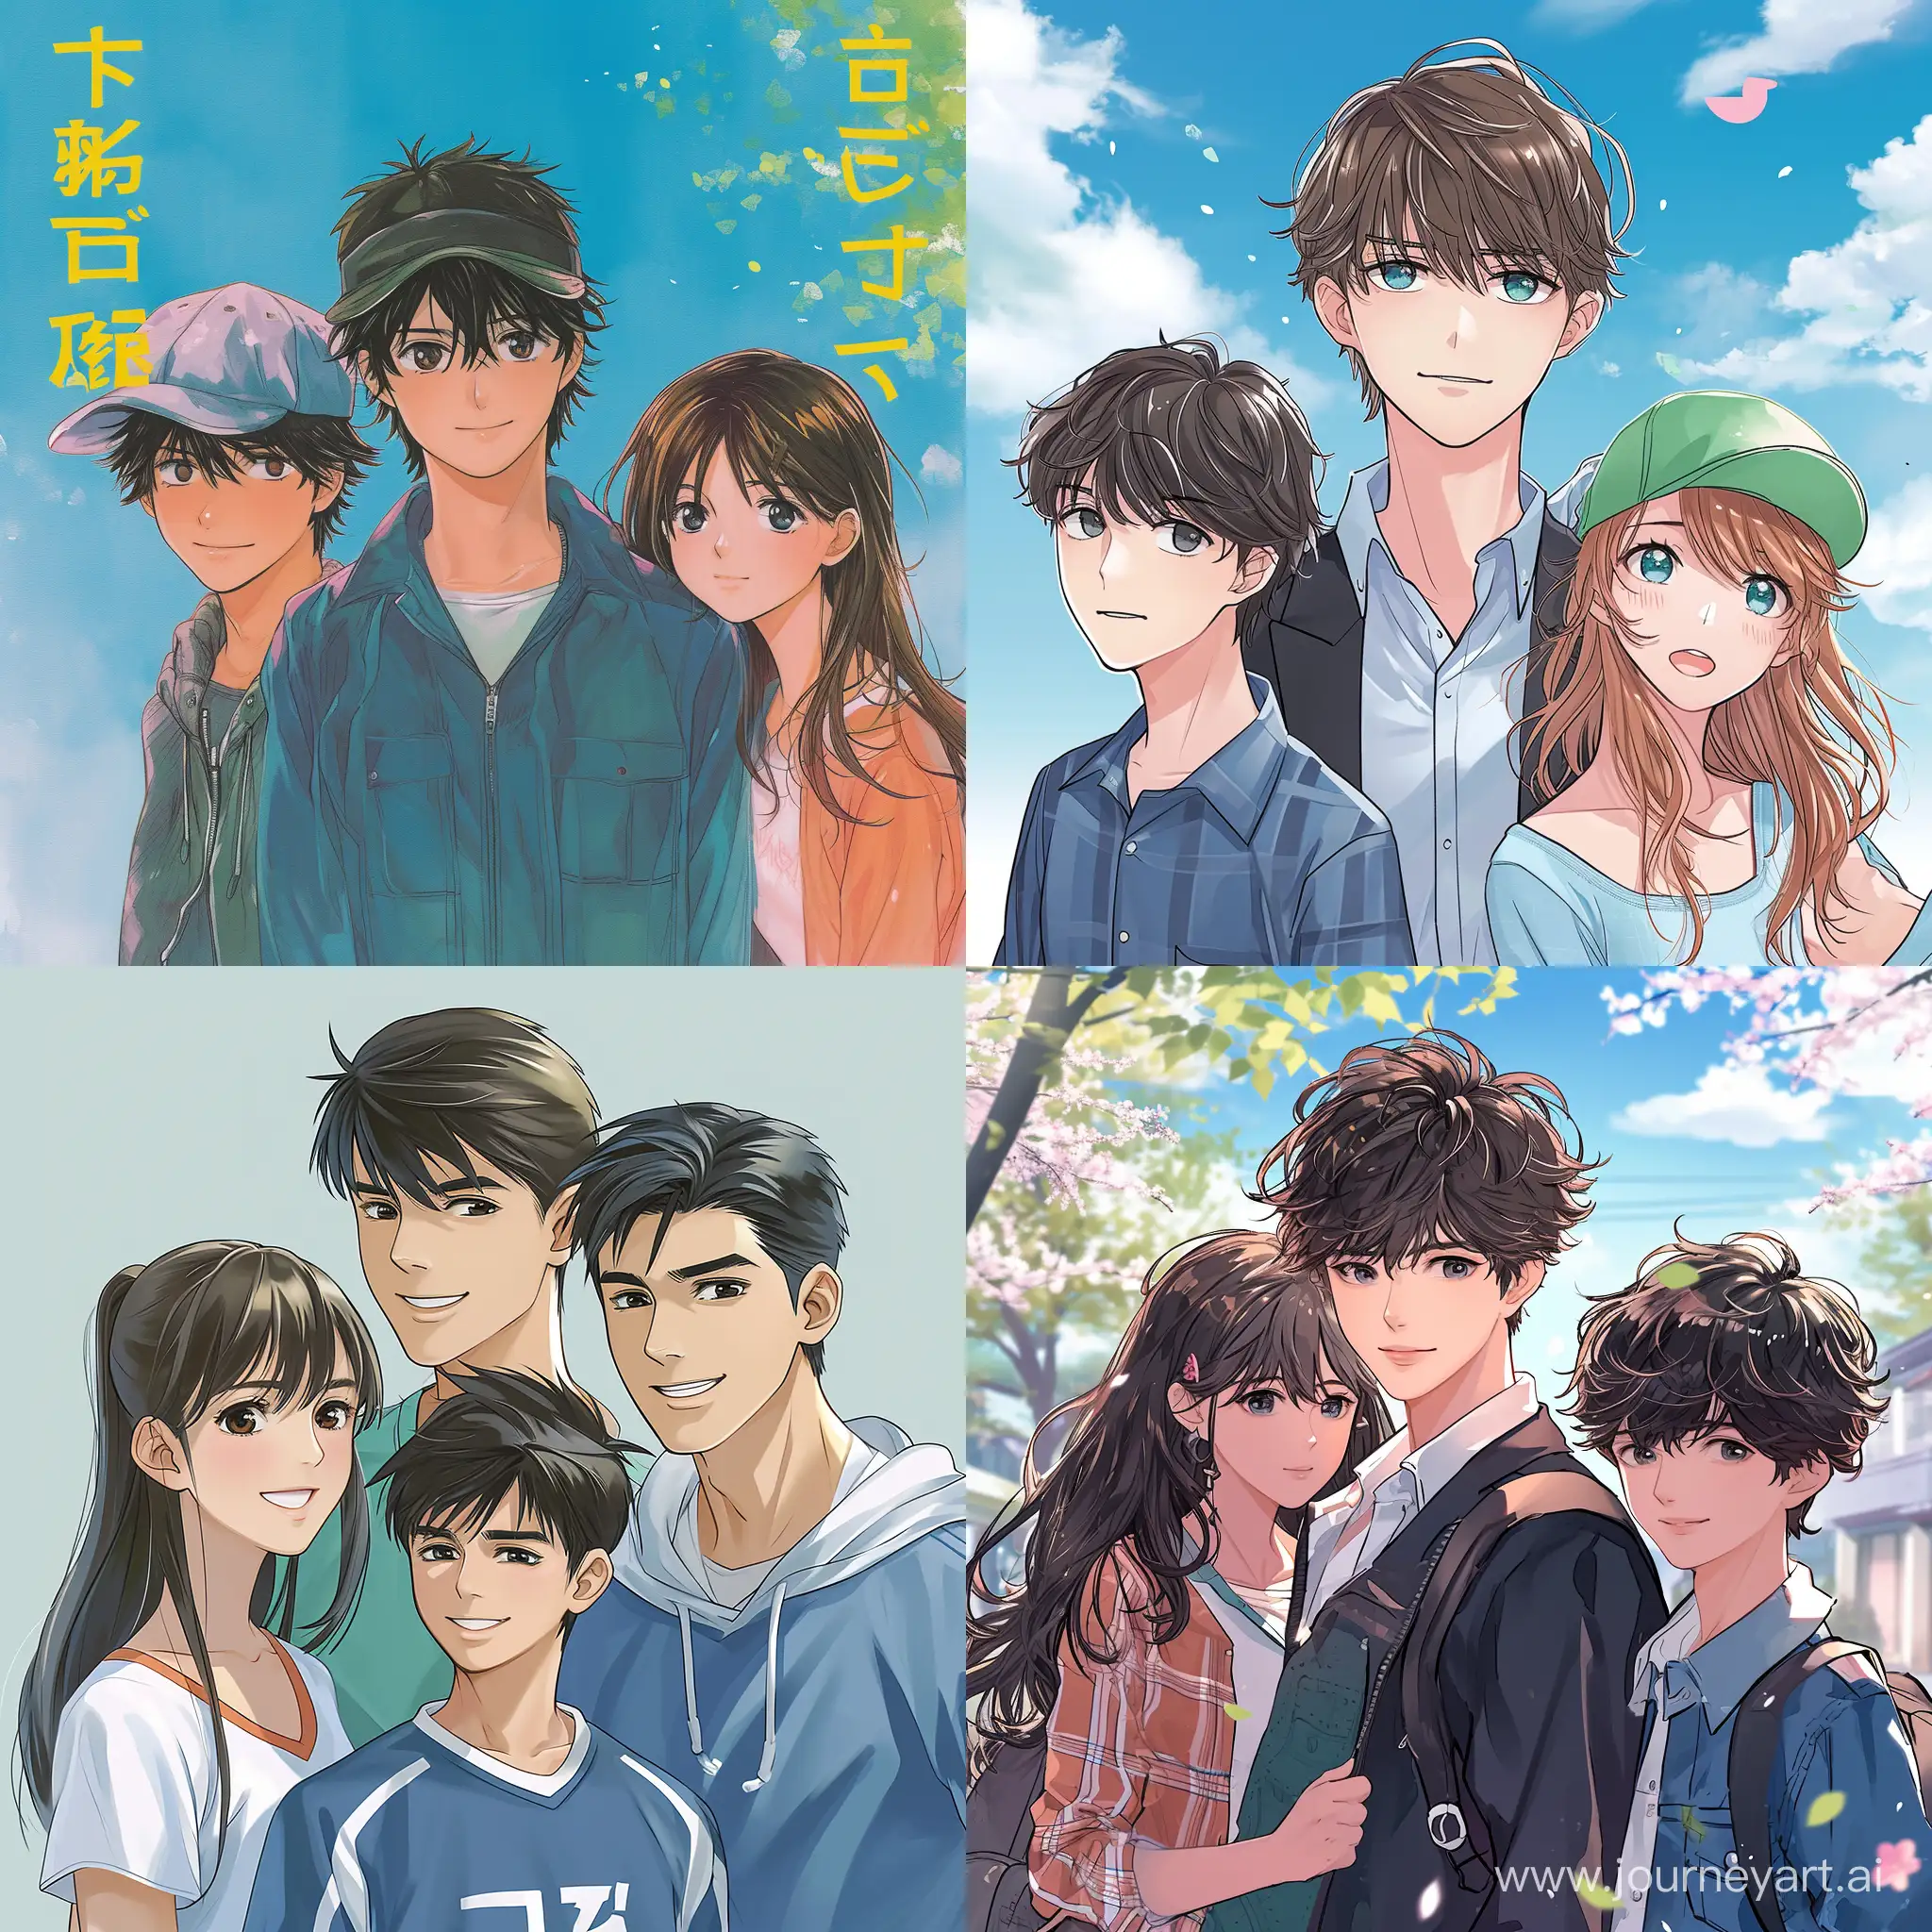 Create a cover for the book. There should be only three main characters in the picture - an intelligent, handsome, strict 16-year-old teenager, his cheerful, stupid younger brother and their girlfriend, a beautiful smart girl. The figures and faces of the characters should be as real as possible as a photo, not anime!